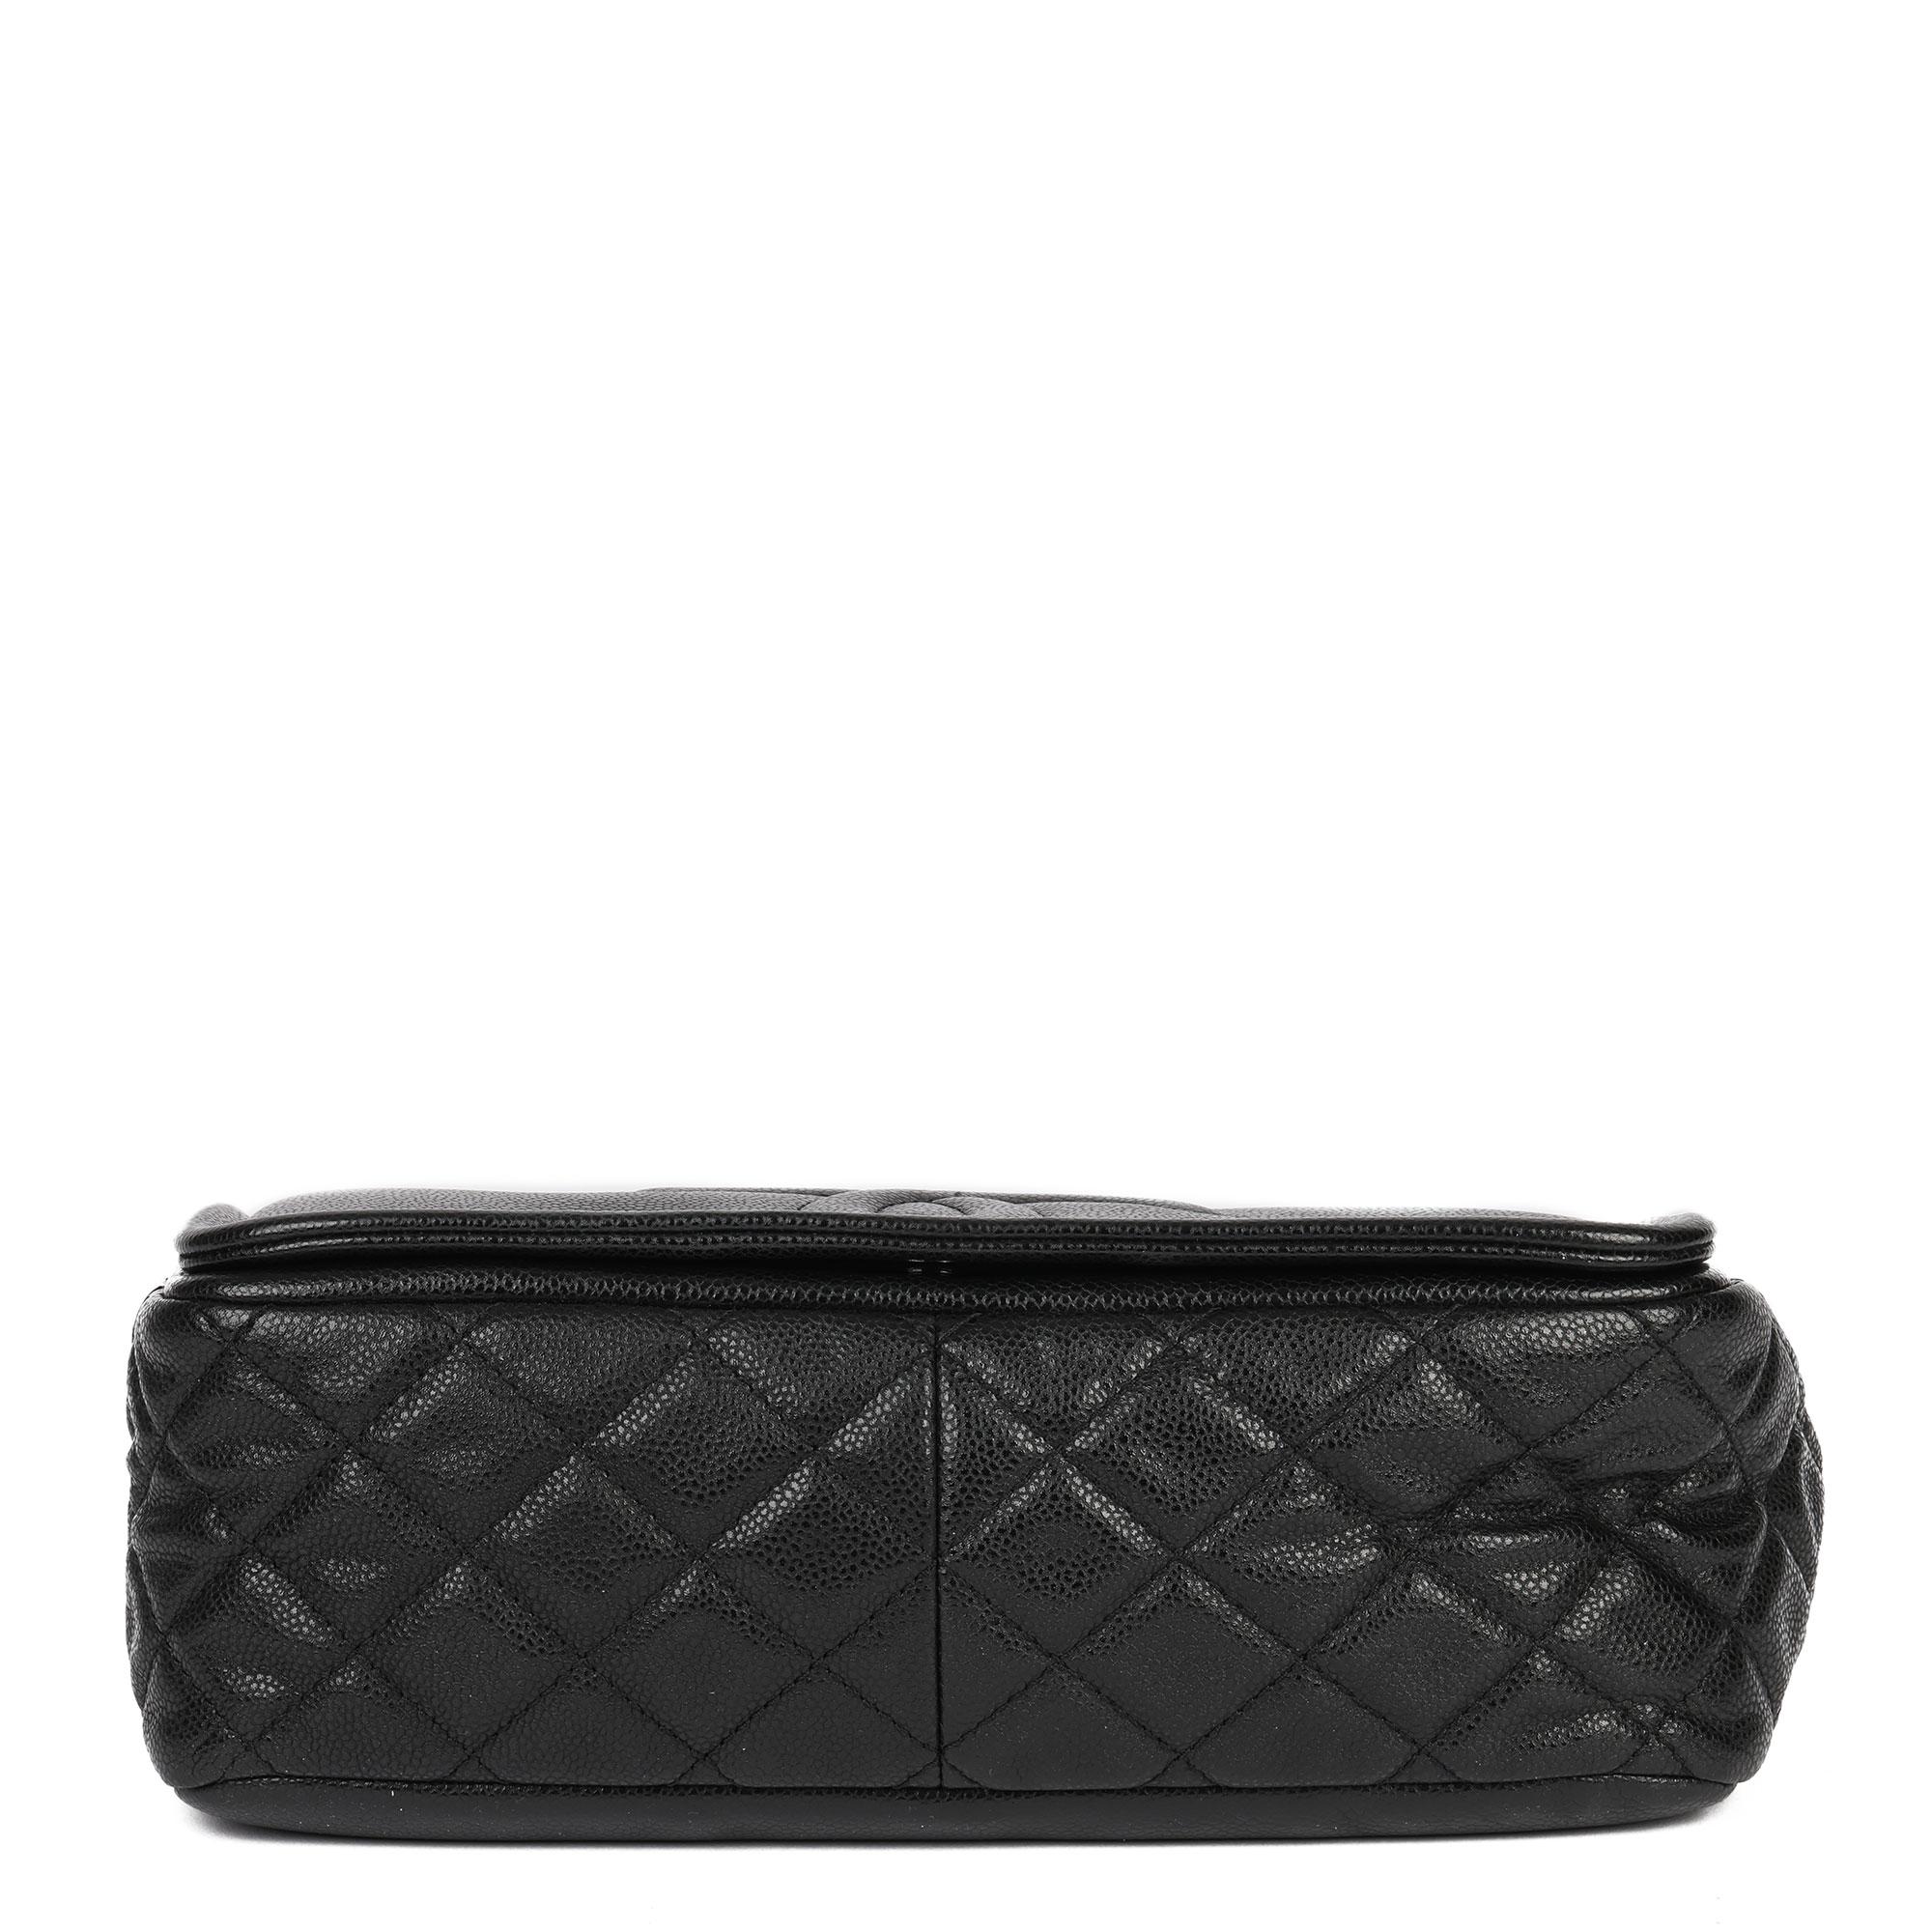 Chanel Black Quilted Caviar Leather Timeless Single Flap Bag 2